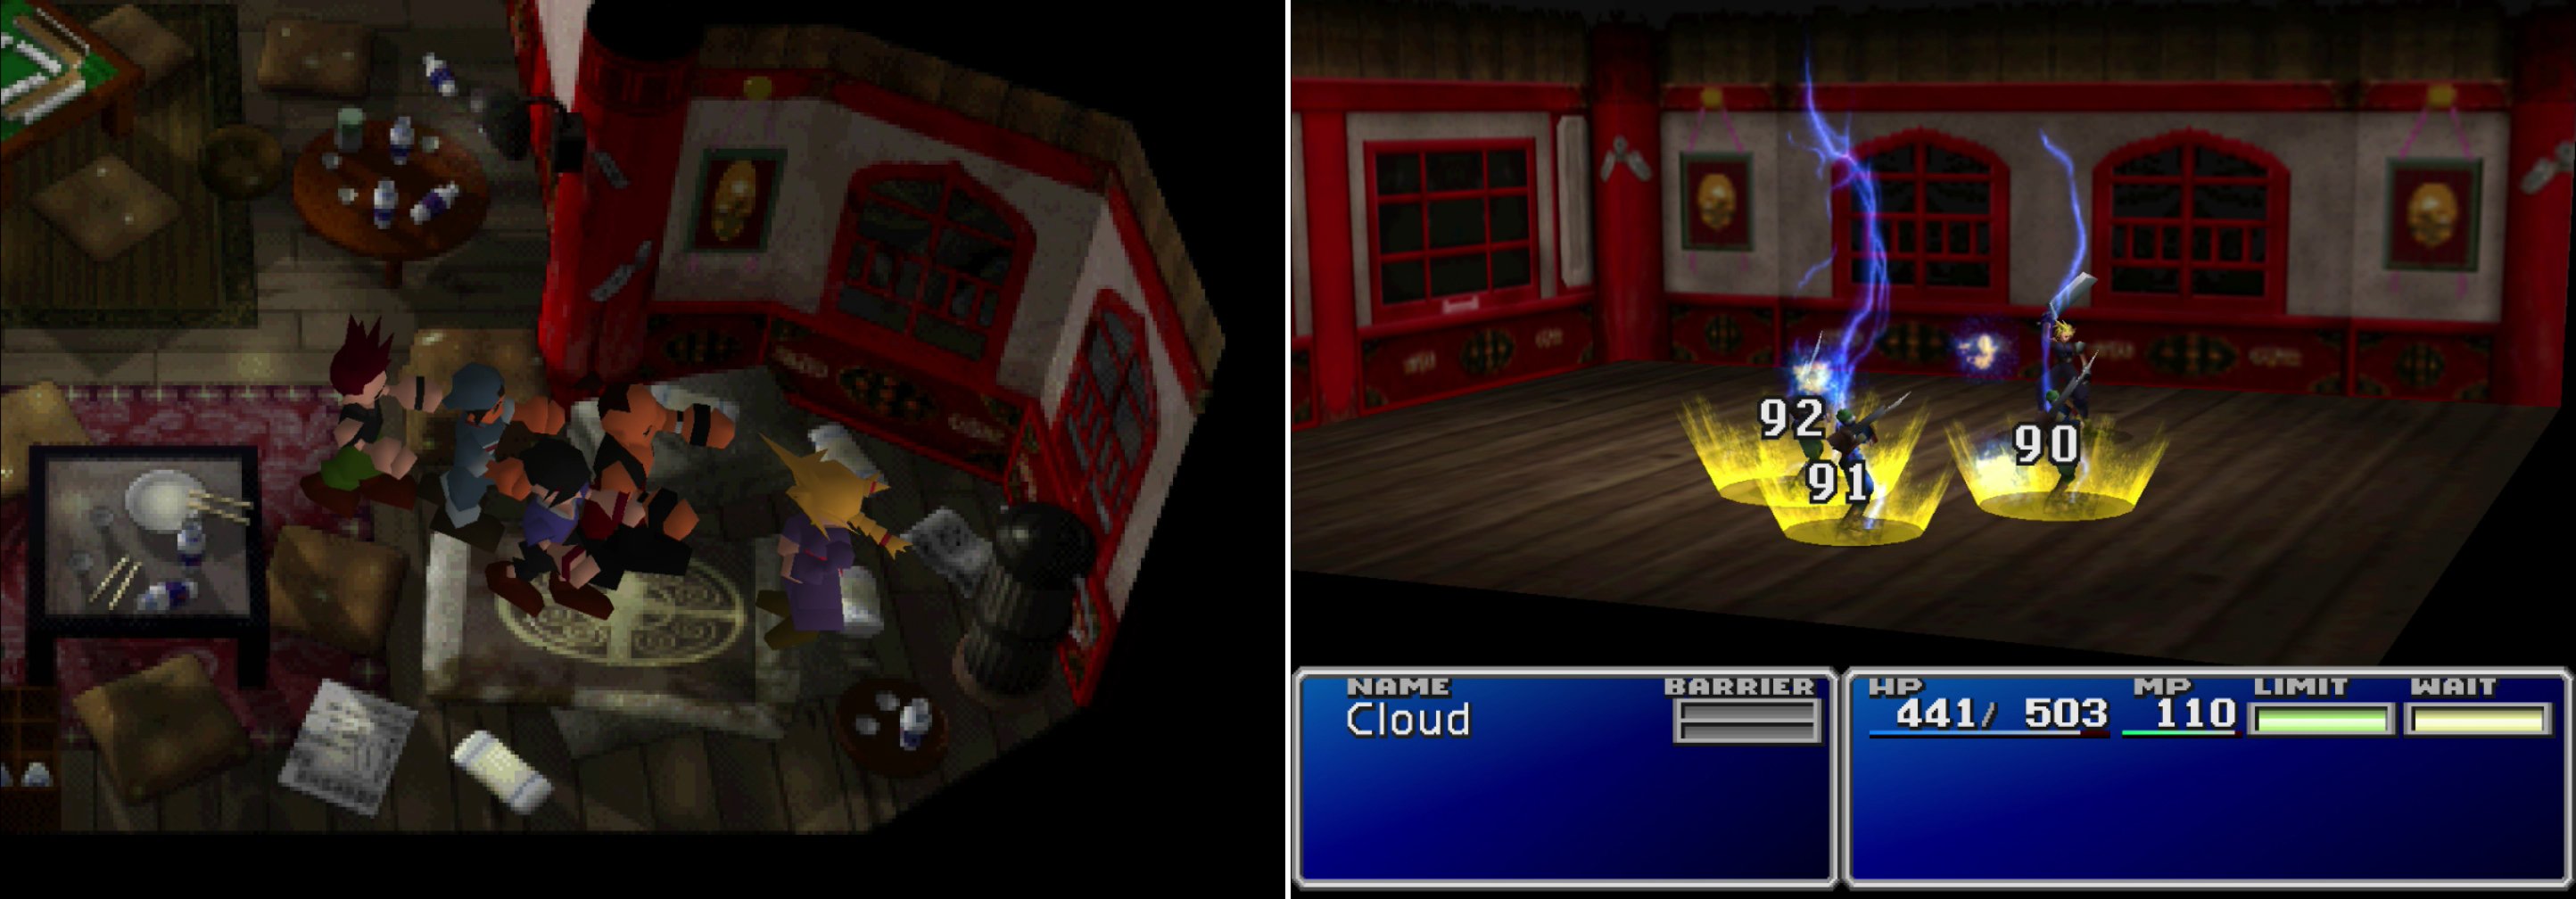 Corneo's lackies will try to seduce Cloud-in-drag by using the infamous mummy pick-up technique (left). Unfortunately, Cloud will slip his disguise and fight off his suitors (right).